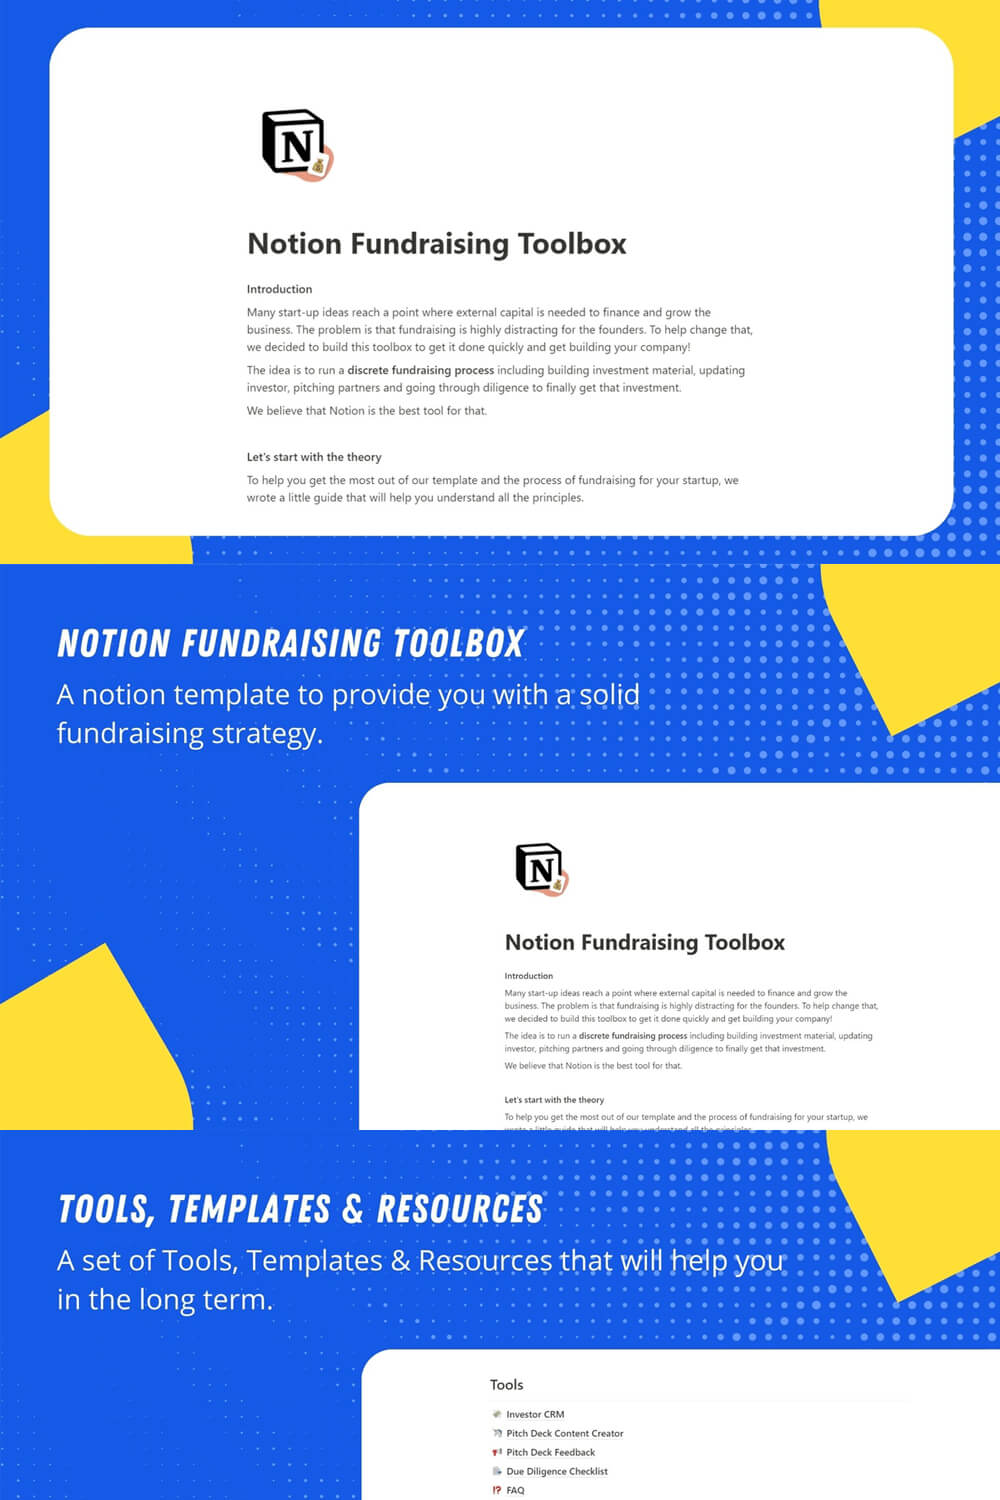 Notion Fundraising Toolbox for pinterest.